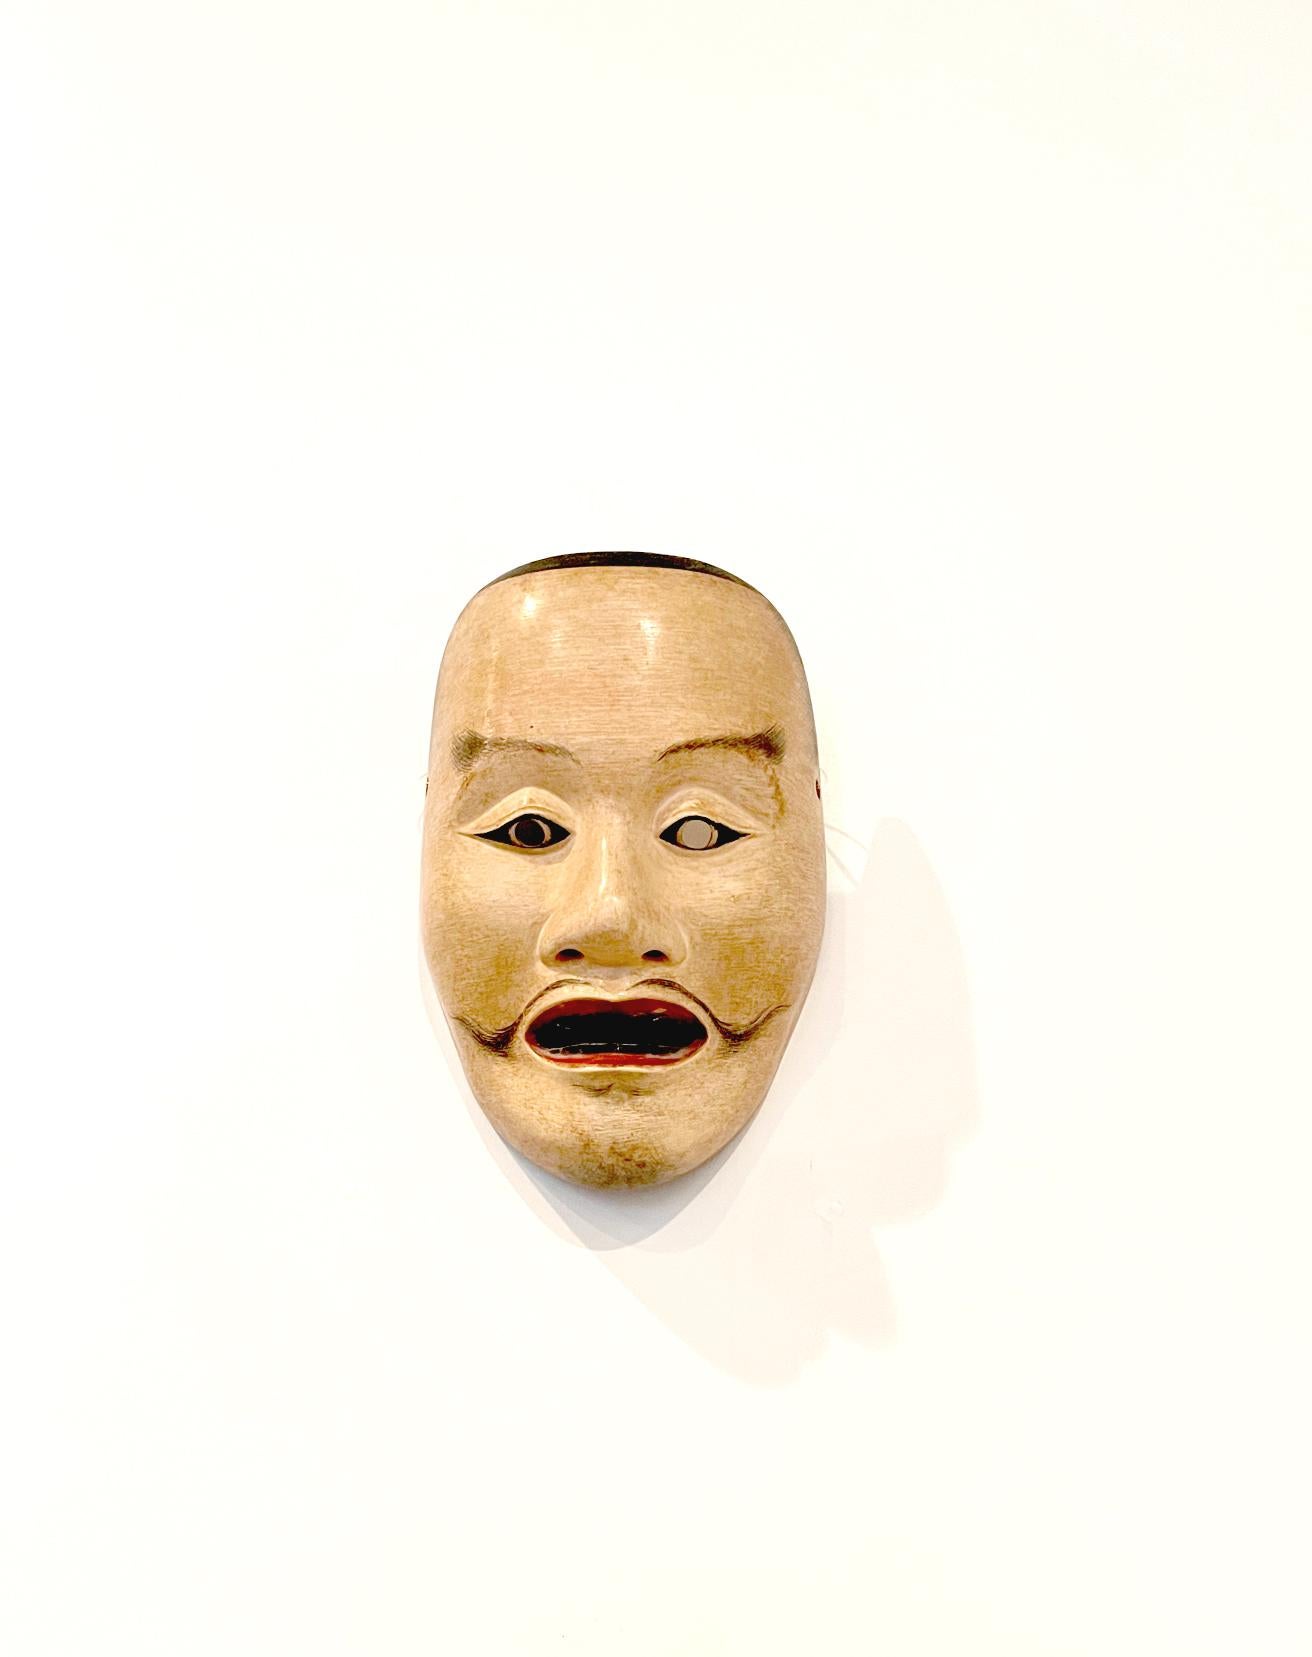 A painted wood mask for Noh theater signed by the artist Nakamura Fuseki and dated to 1824, of Edo period. The mask depicts the face of a Heita, which portrays the ghost of Genji generals and warriors in plays like Yashima and Ebira. It was finely